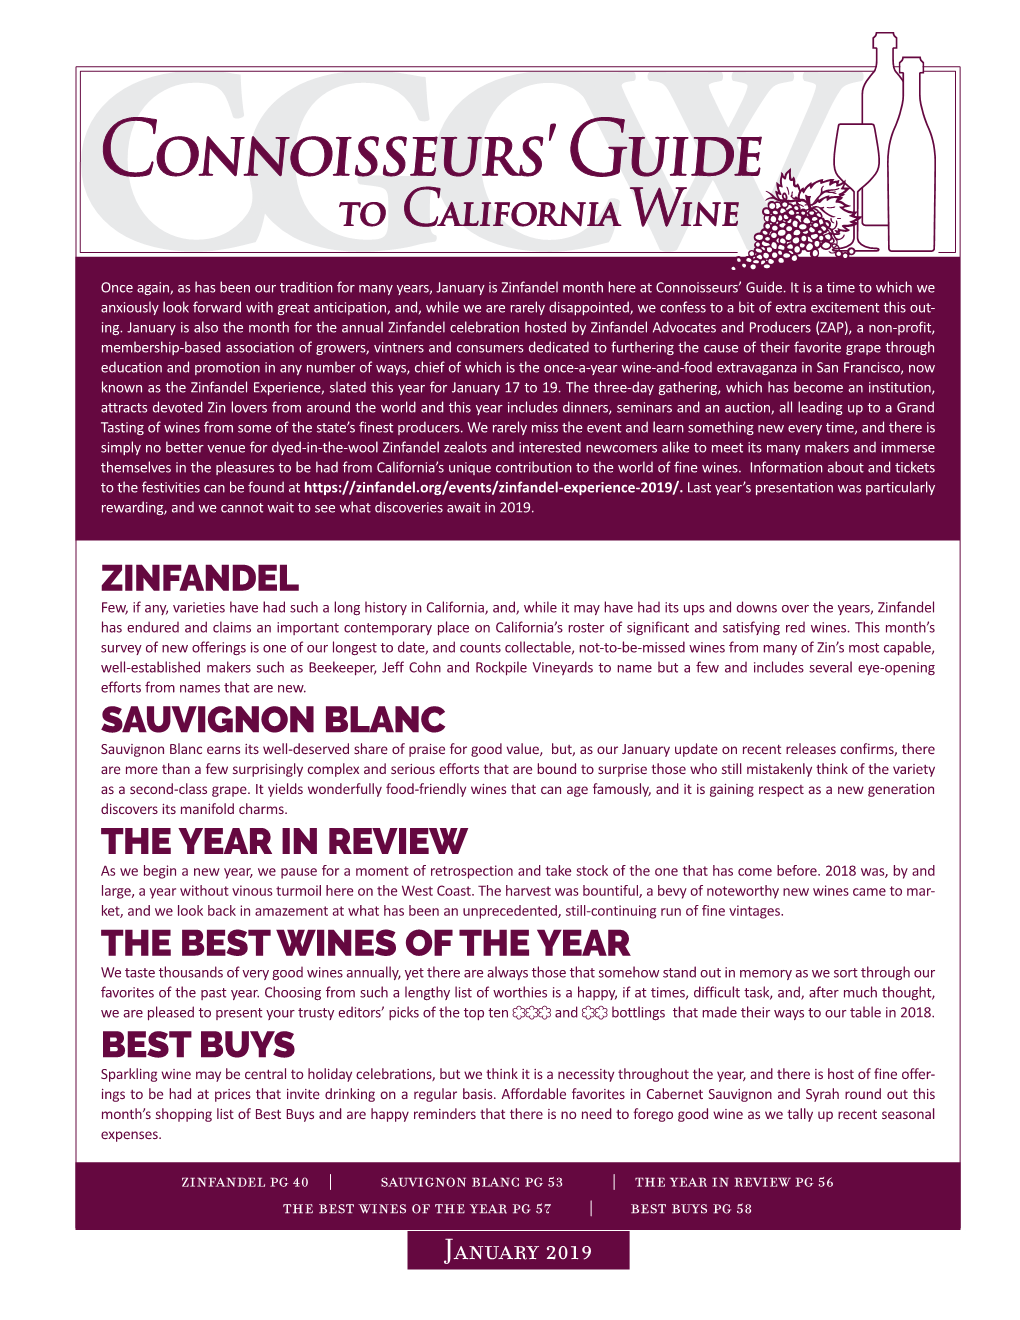 Zinfandel Sauvignon Blanc the Year in Review the Best Wines of the Year Best Buys